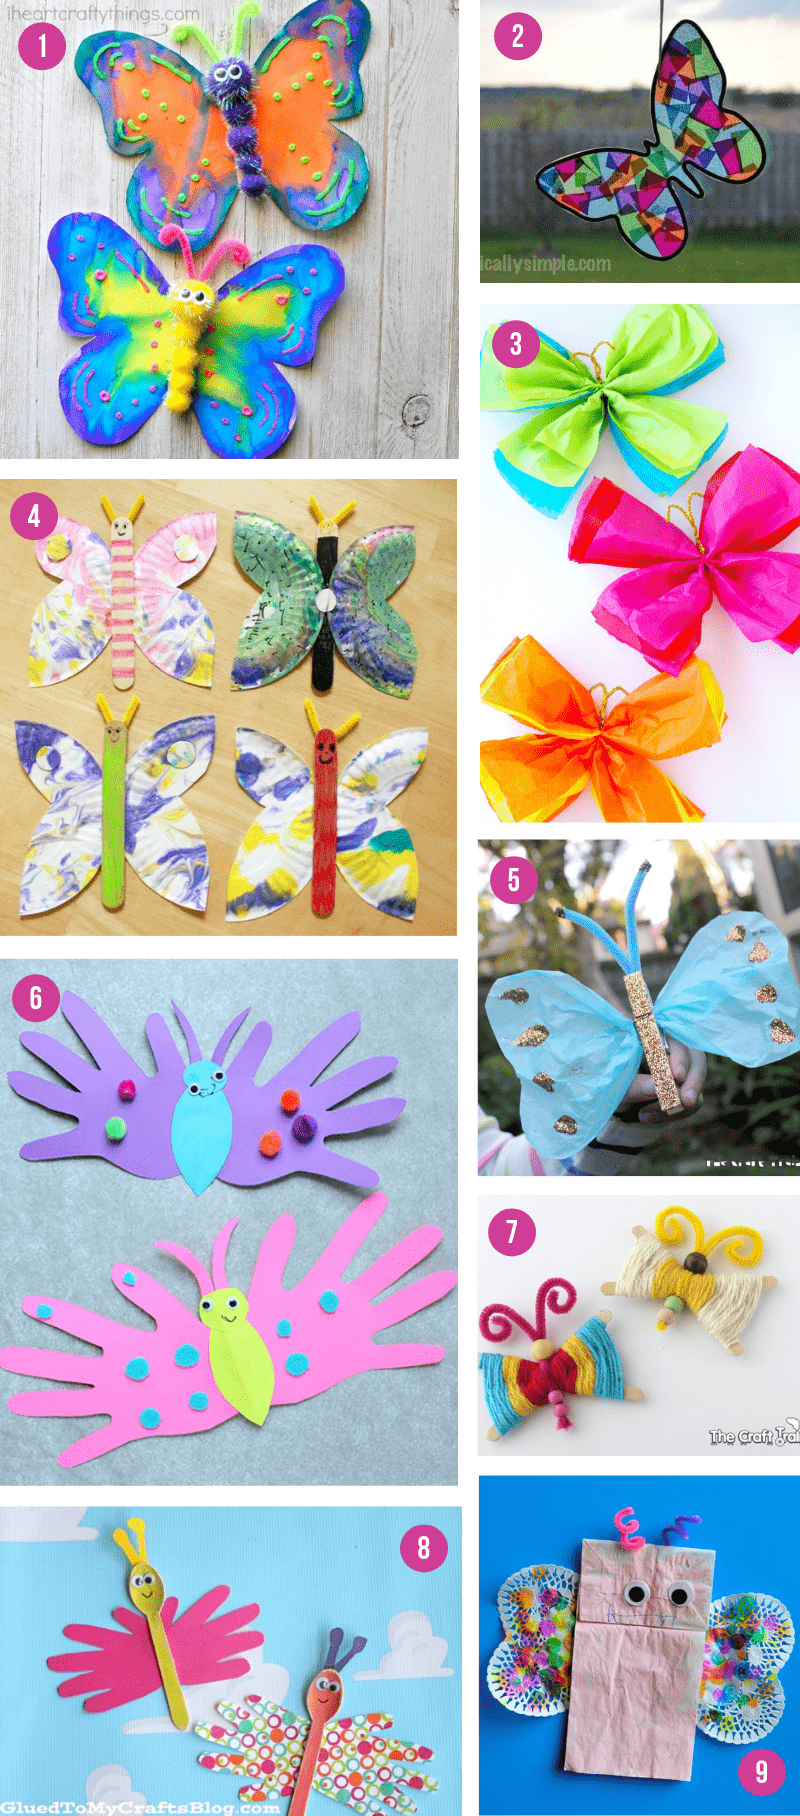 Stunning Spring Art Projects for Kids - One Time Through